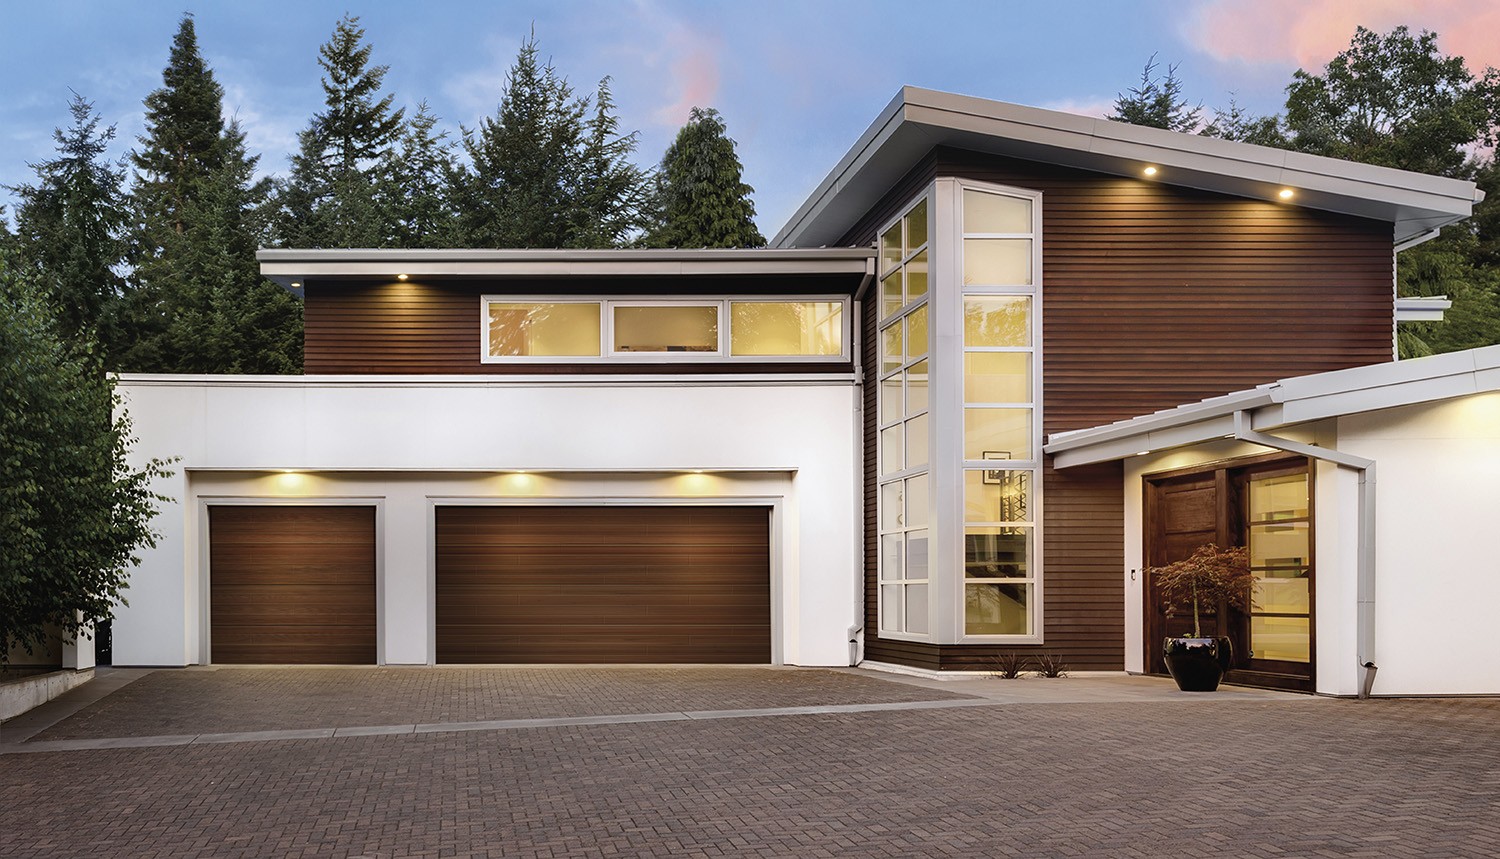 What are the Best Lighting Choices for My Garage? - Raynor